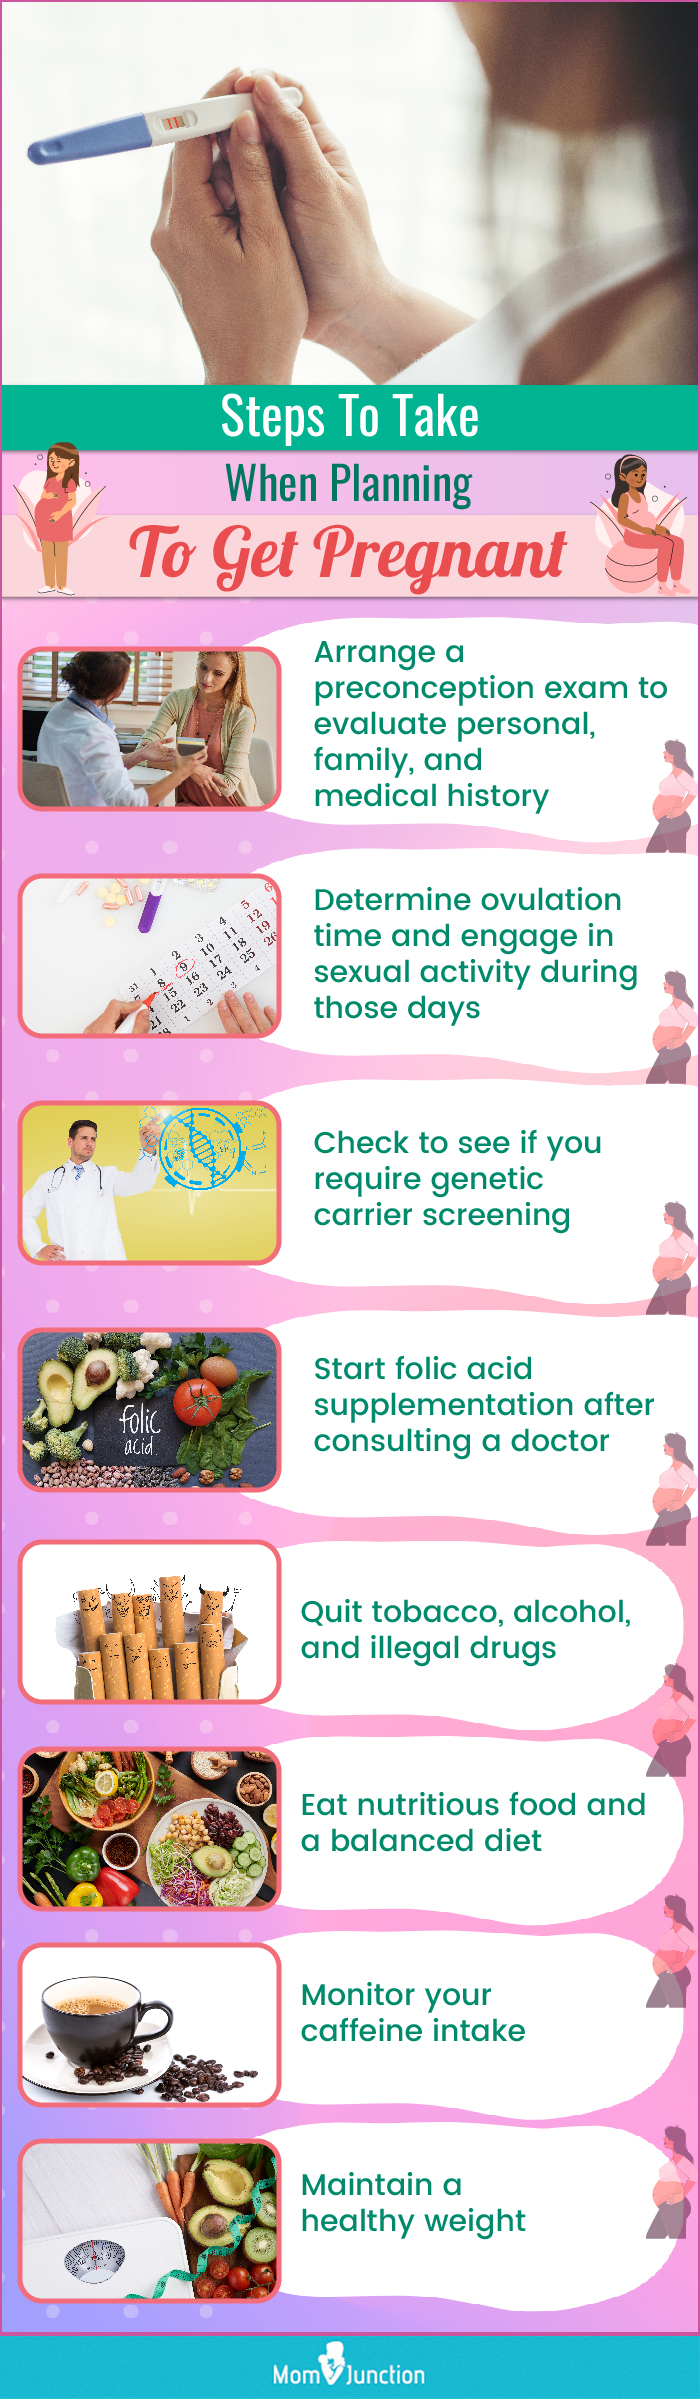 steps to take when planning to get pregnant (infographic)